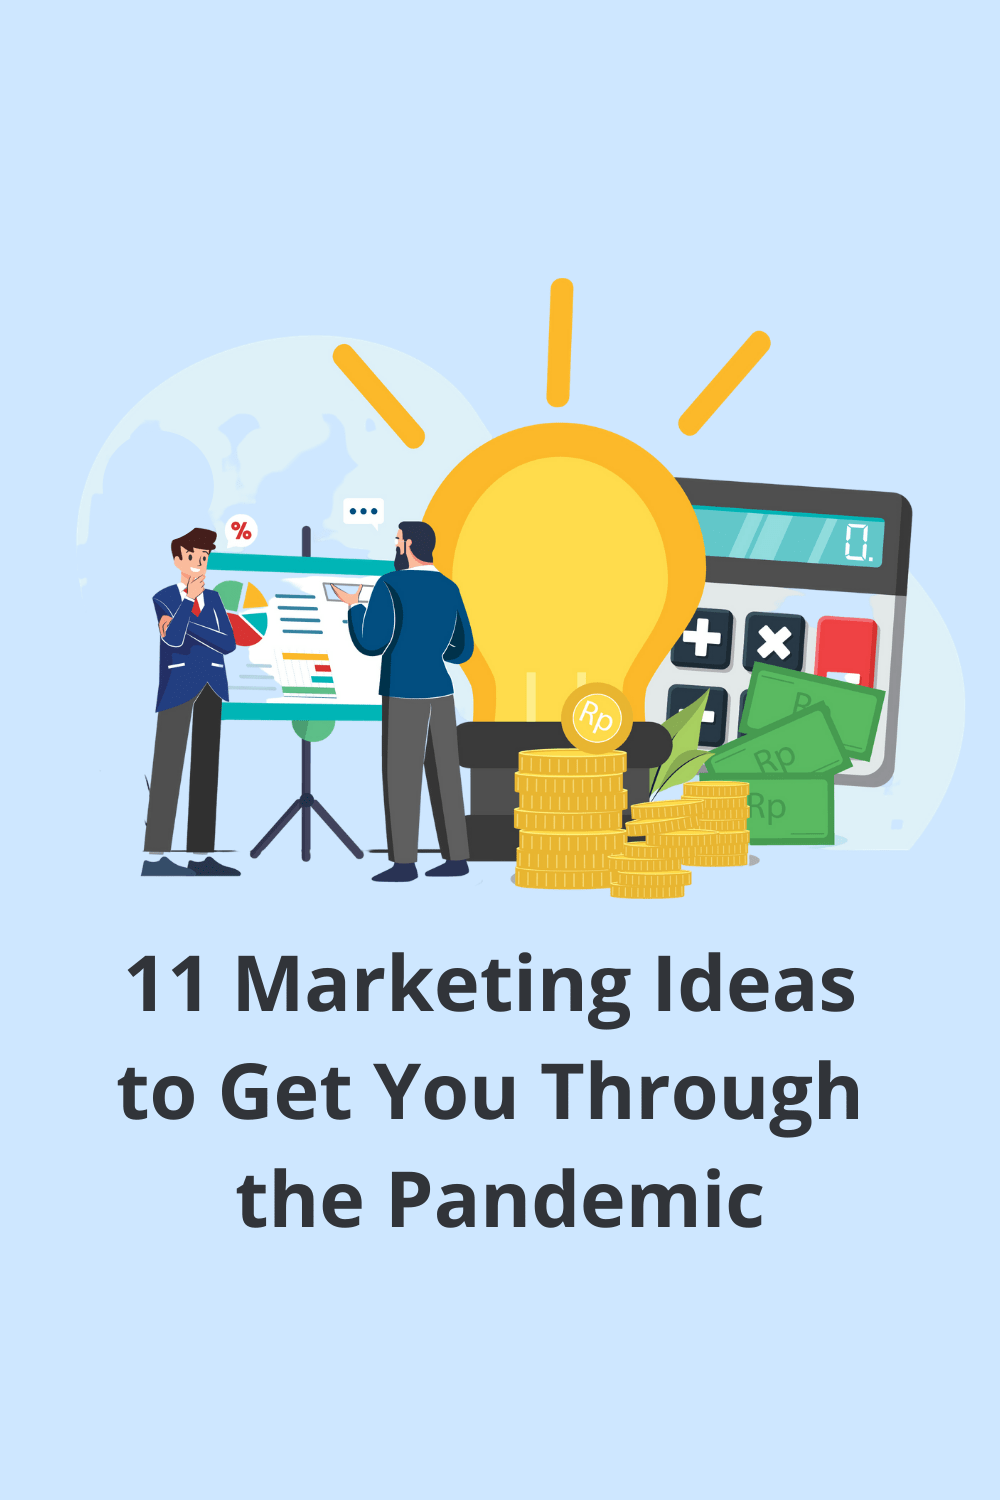 A thoughtful, data-based approach can help you get the maximum bang for your buck – and be in good shape to rebound when the pandemic is over. via @scopedesign